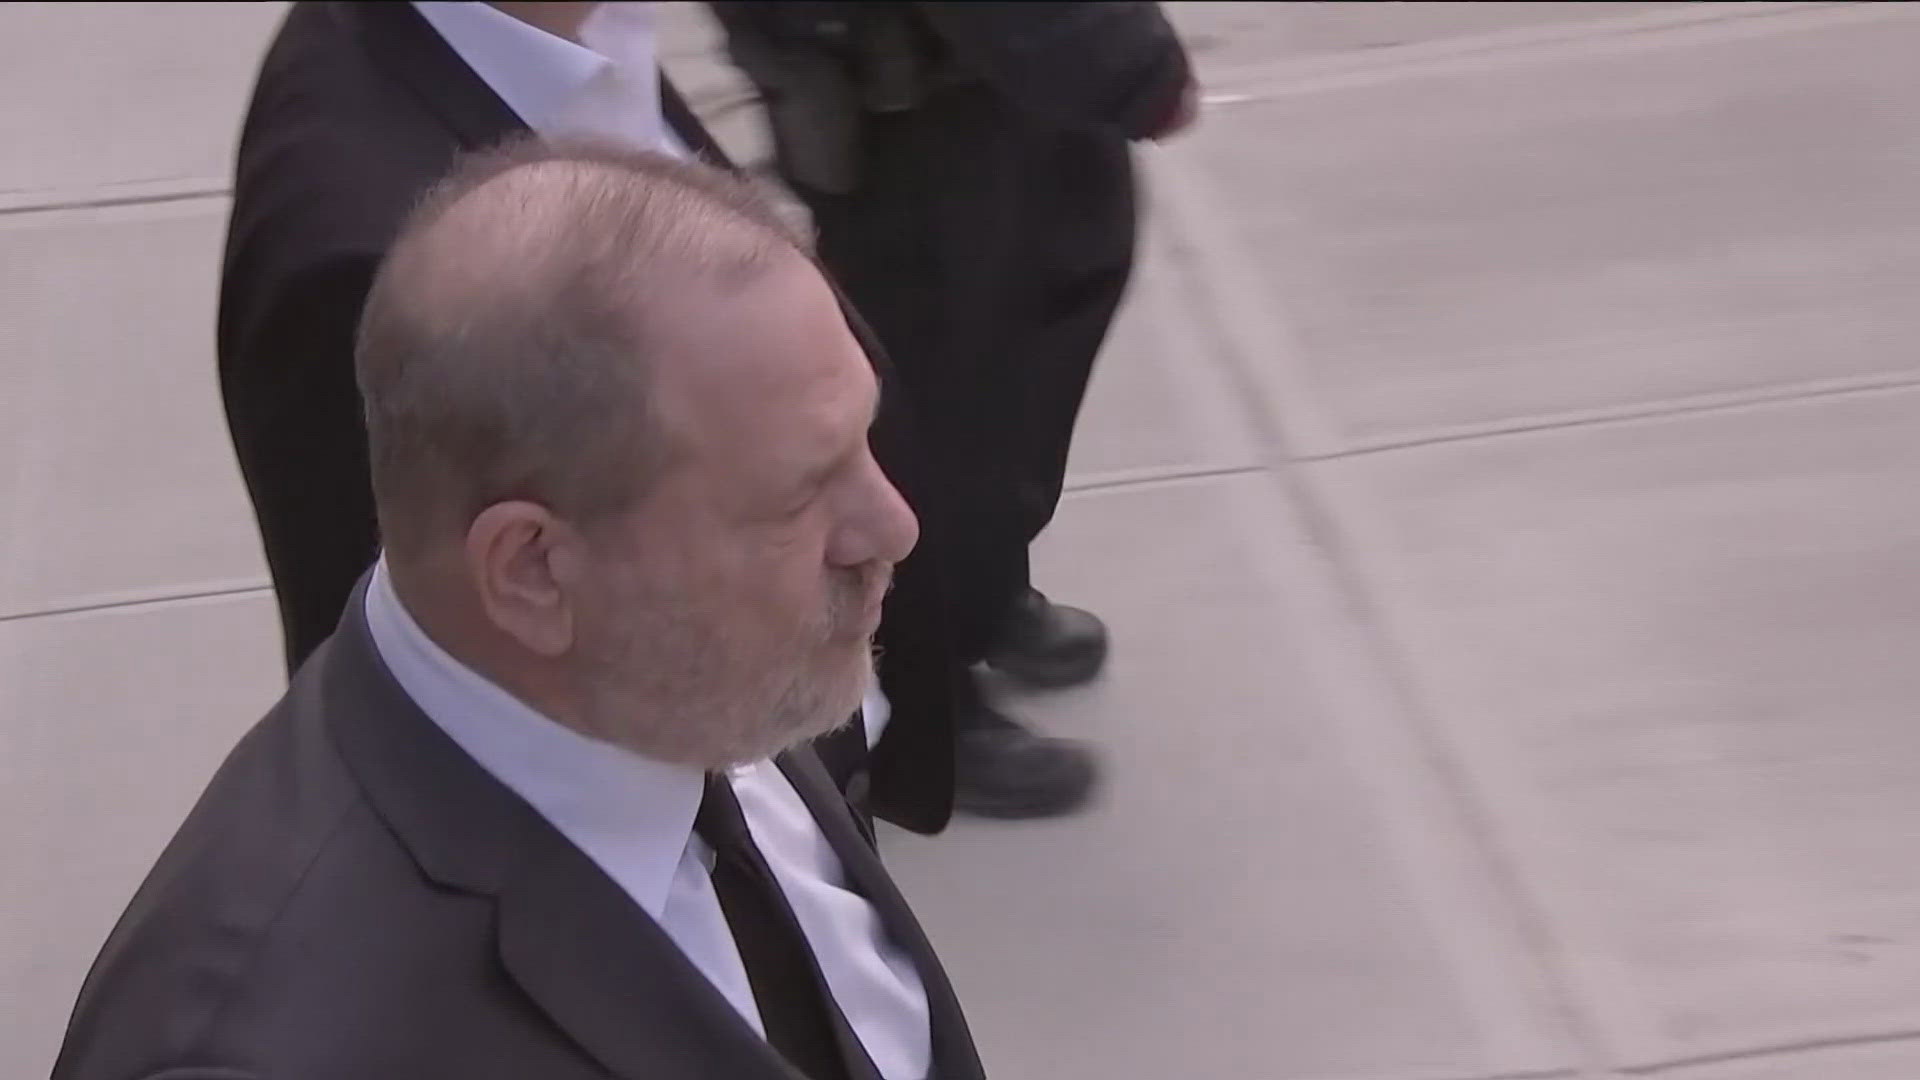 While the New York conviction was thrown out, Weinstein will remain in prison because he was convicted in Los Angeles of another rape and sentenced to 16 years.